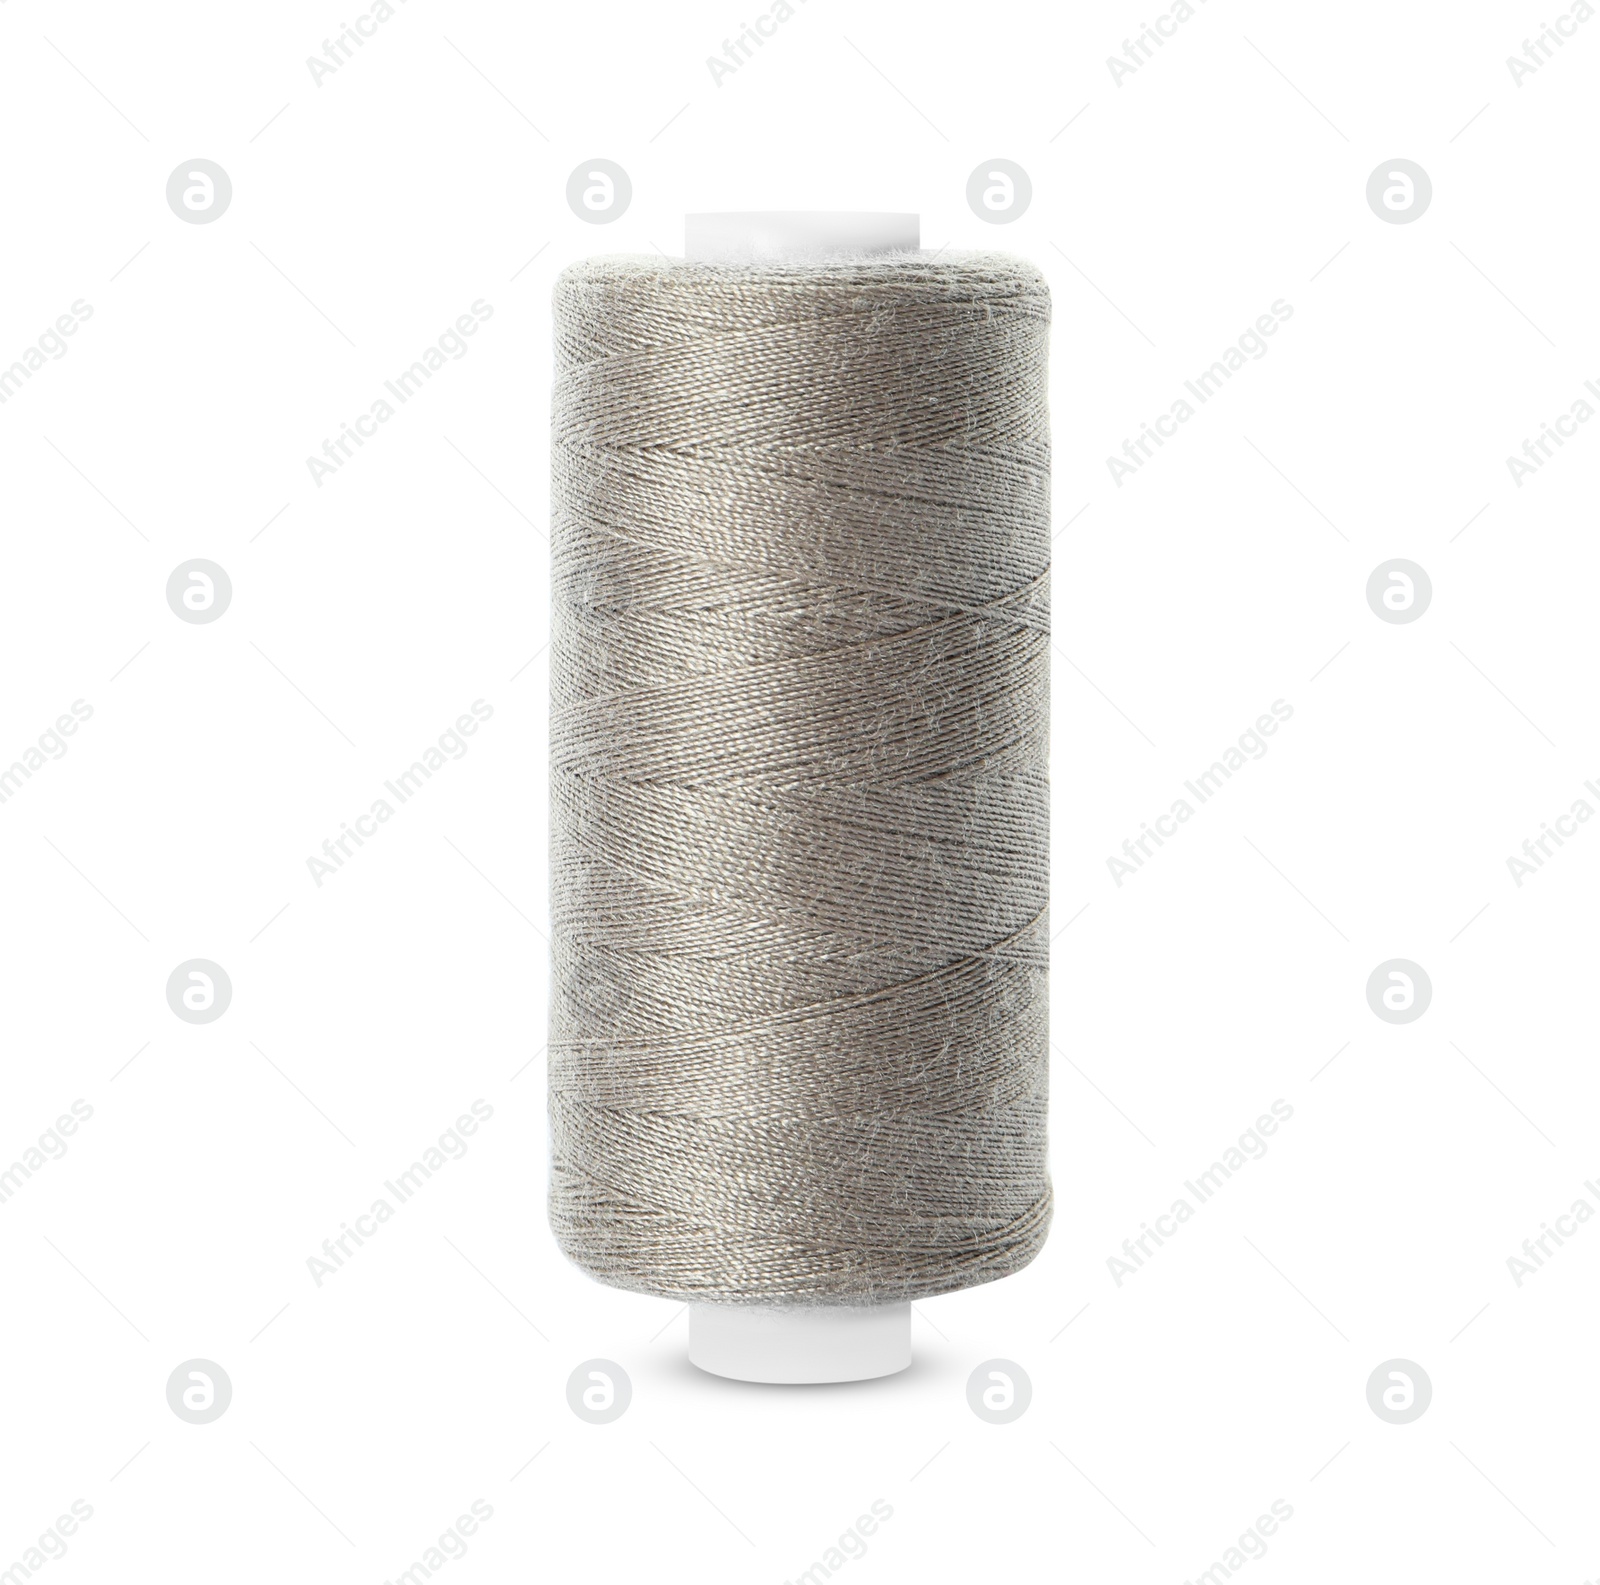 Photo of Spool of light grey sewing thread isolated on white